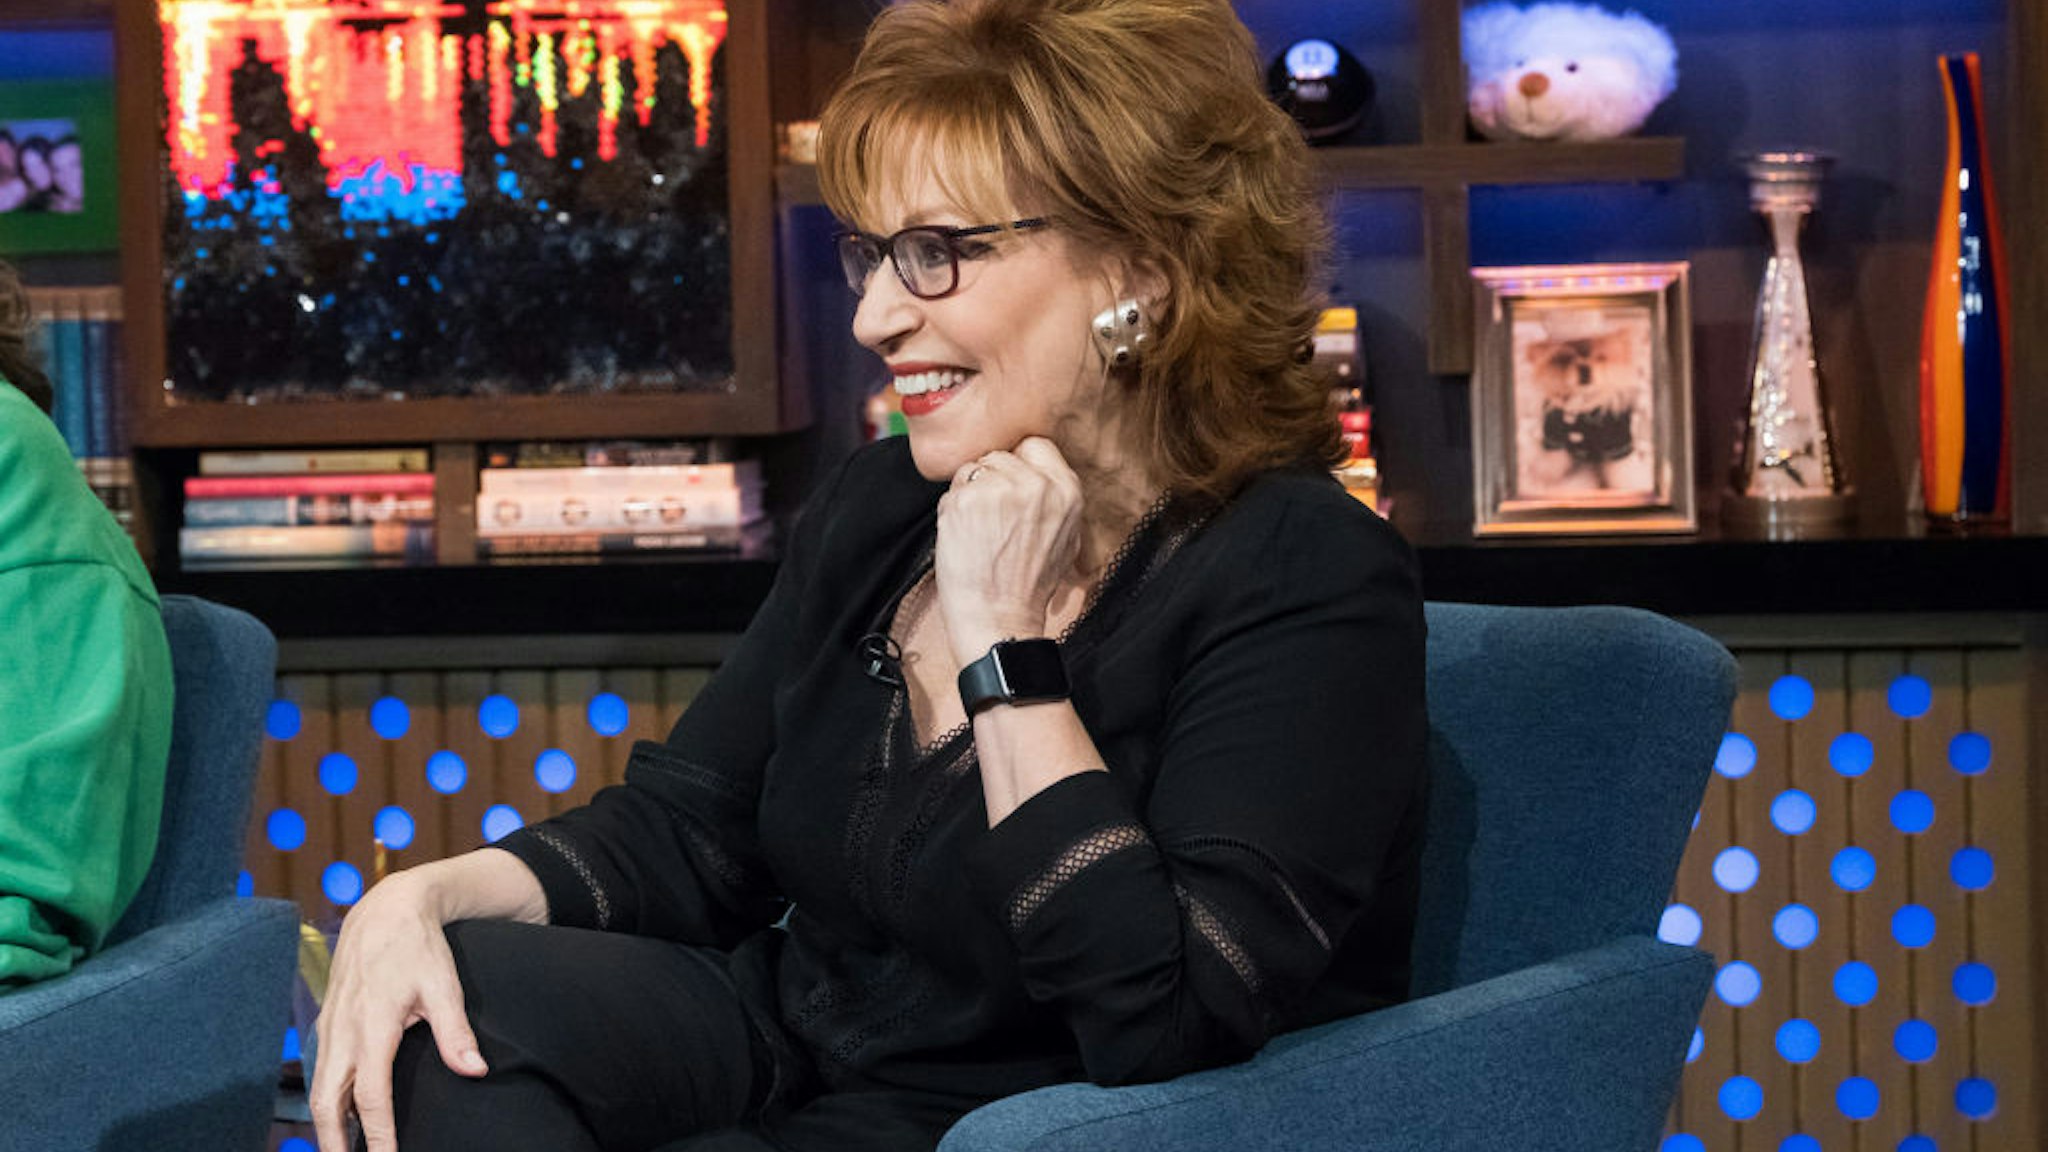 WATCH WHAT HAPPENS LIVE WITH ANDY COHEN -- Pictured: Joy Behar -- (Photo by: Charles Sykes/Bravo/NBCU Photo Bank/NBCUniversal via Getty Images)